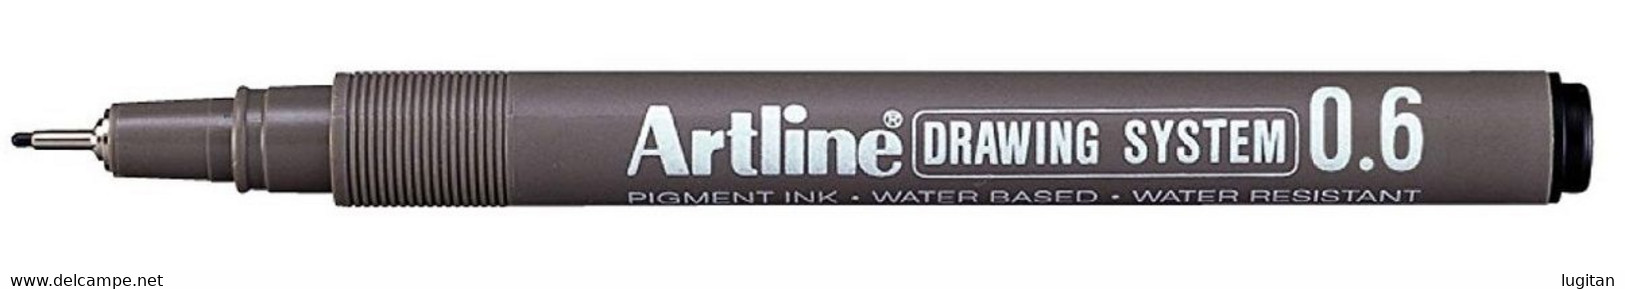 Artline - Drawning System - 0.6 - Nero - Disegno Grafico  - Water Based - Water Resistant - Acid Free - Stylos